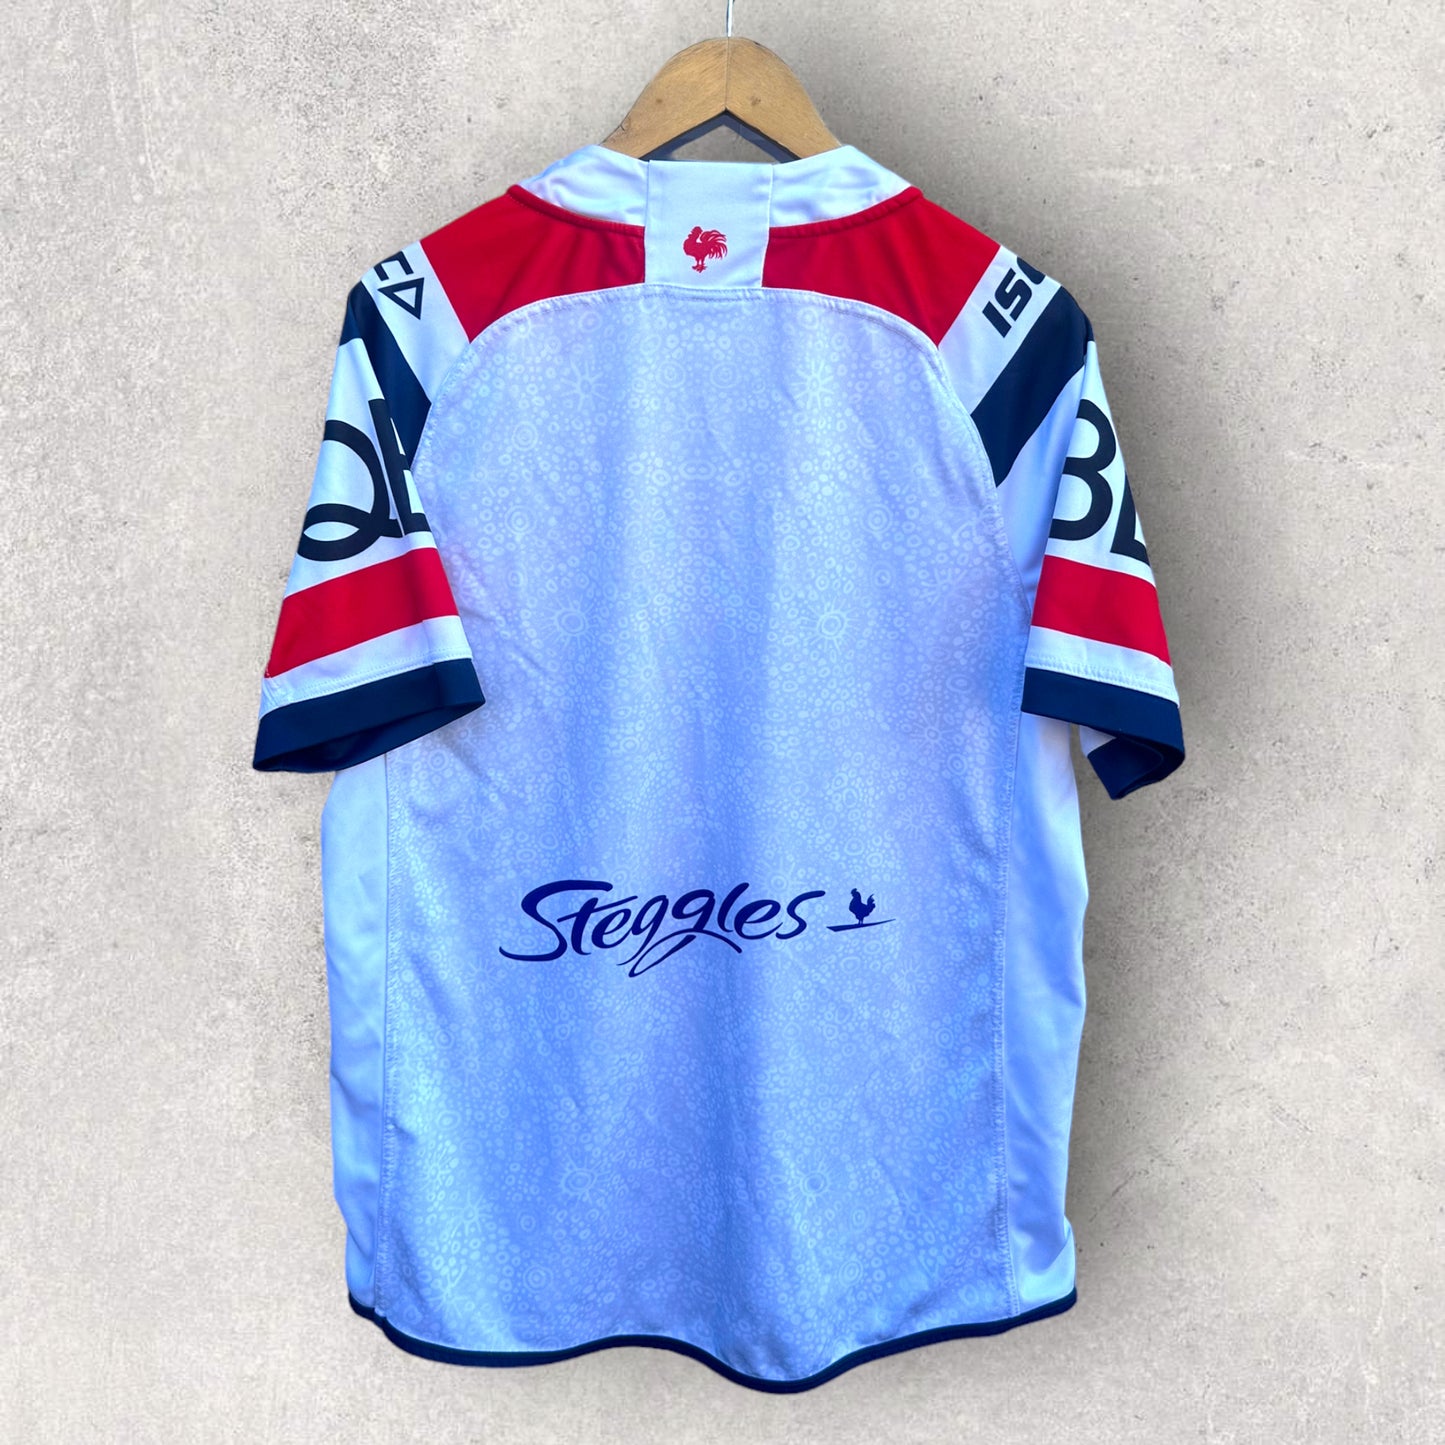 SYDNEY ROOSTERS 2018 INDIGENOUS JERSEY